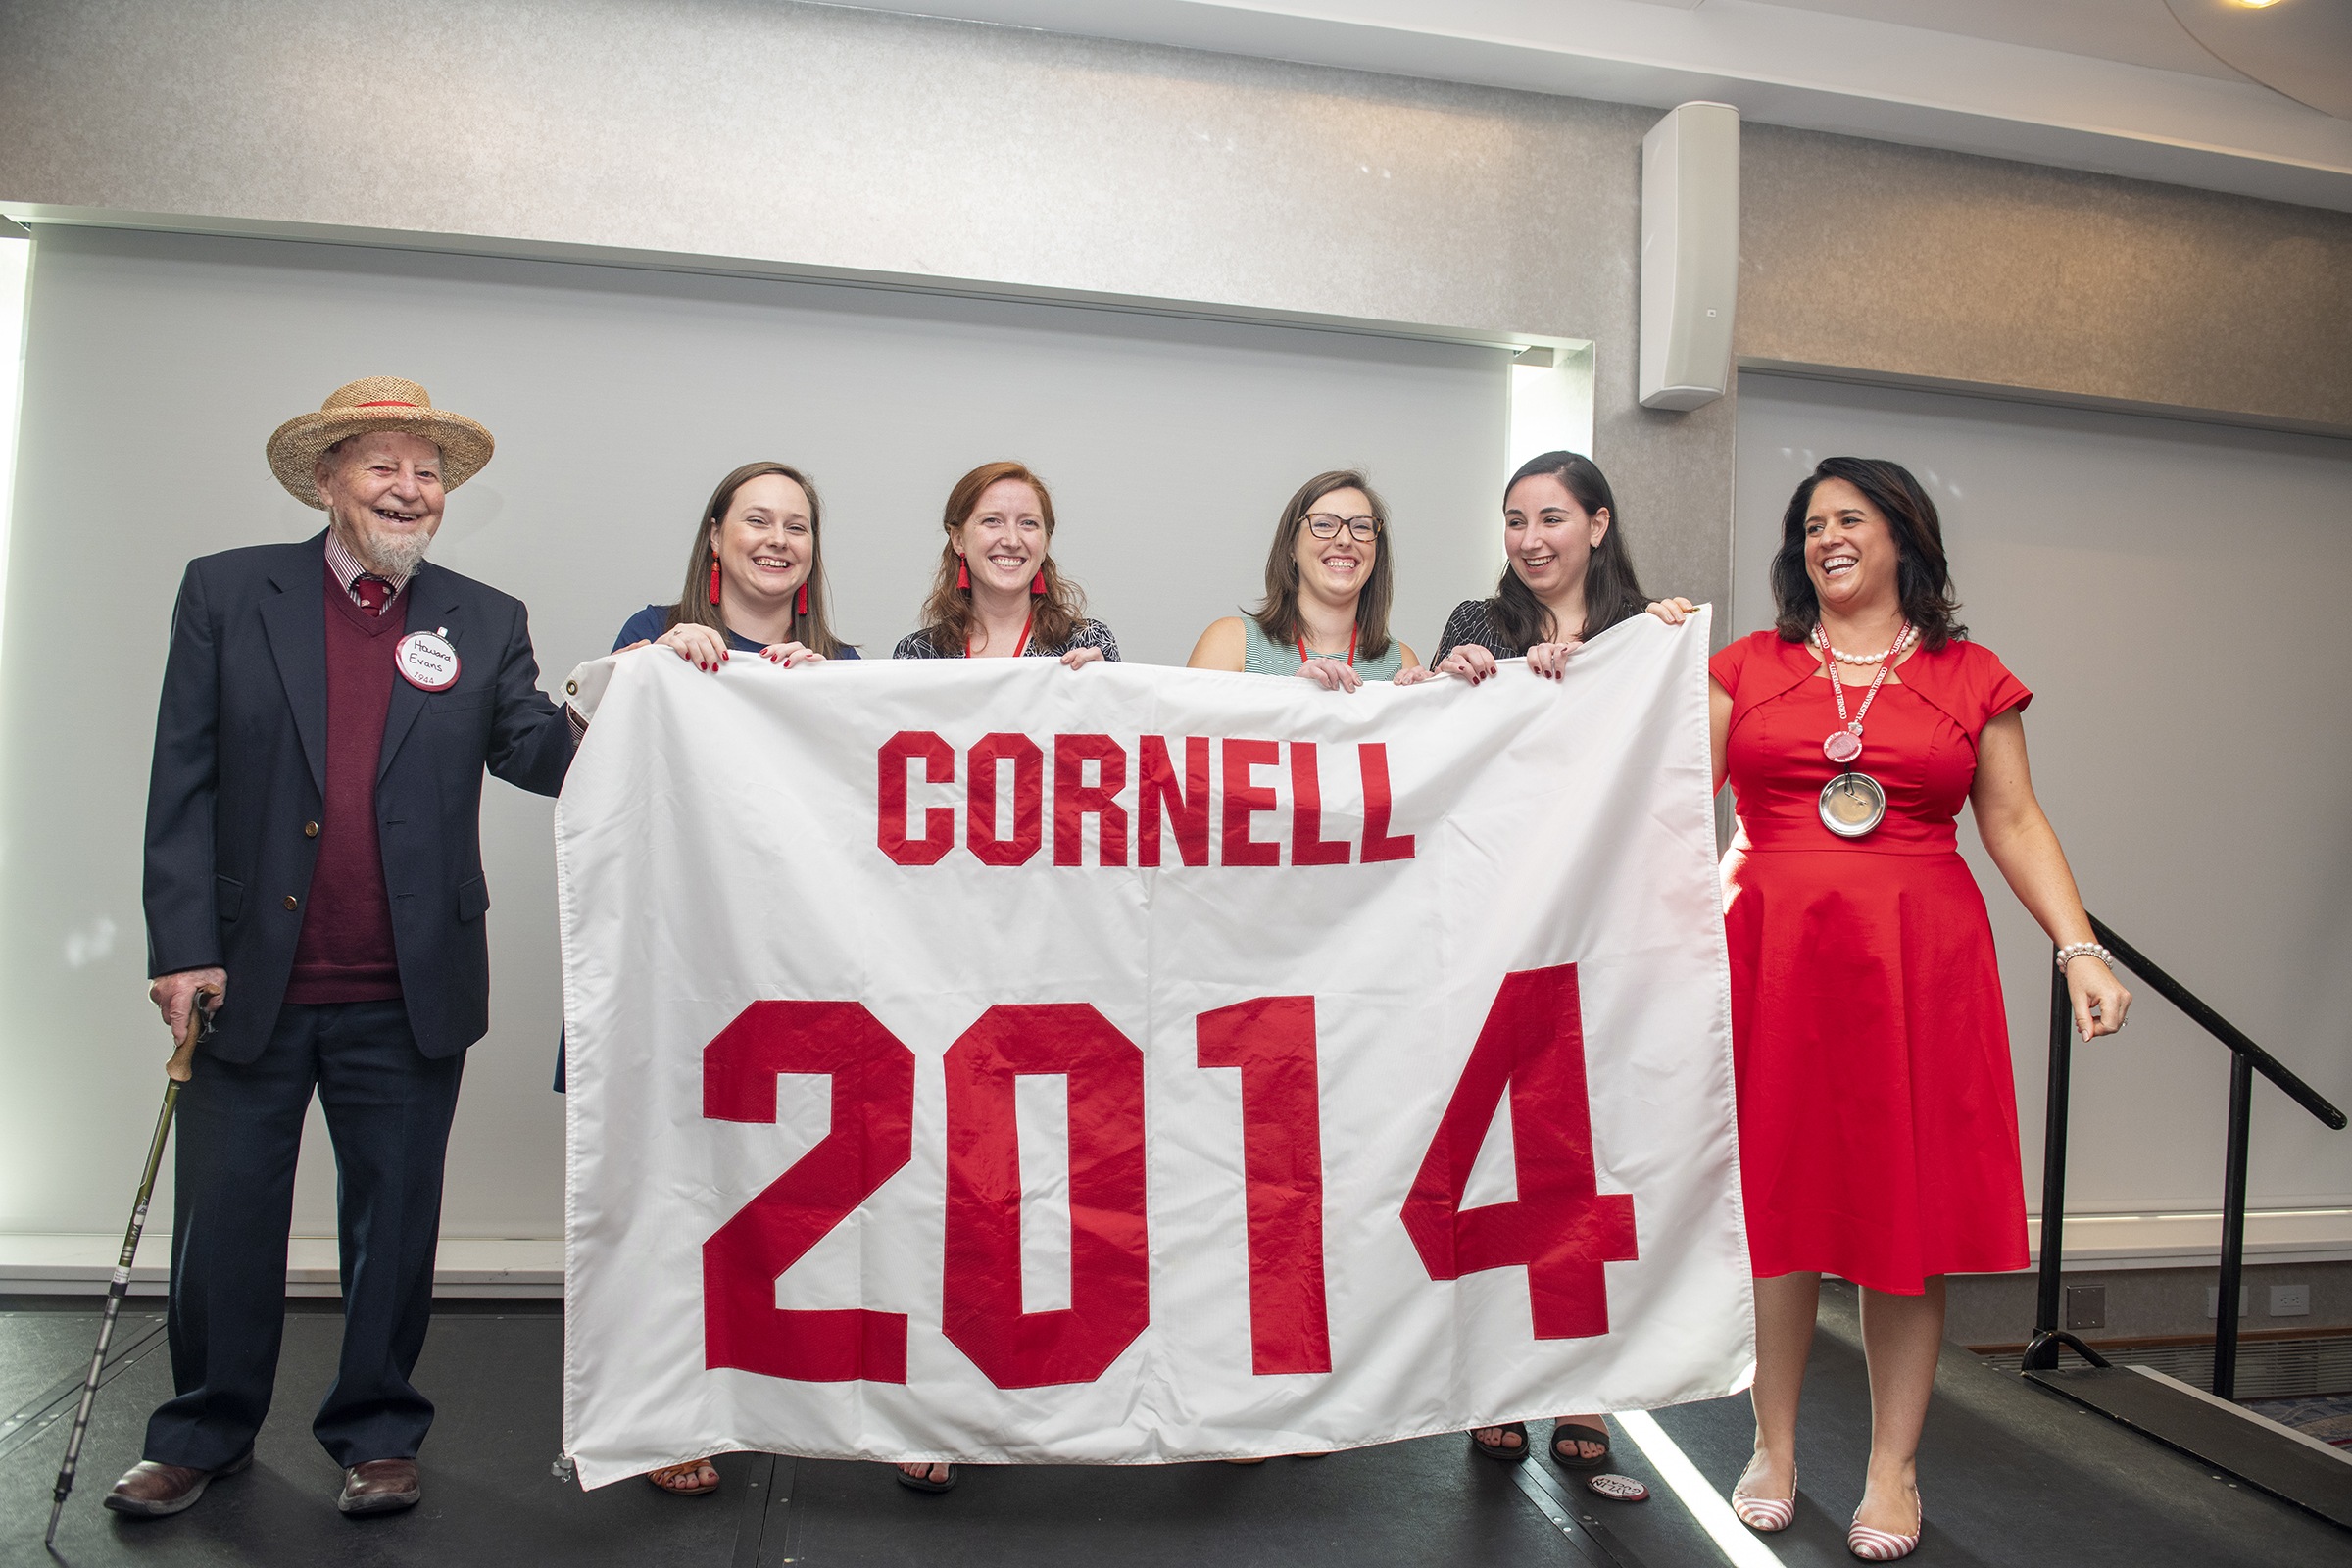 Howard Evans ’44 (left) presents a new Class of 2014 banner to Reunion chairs from the Class of 2014